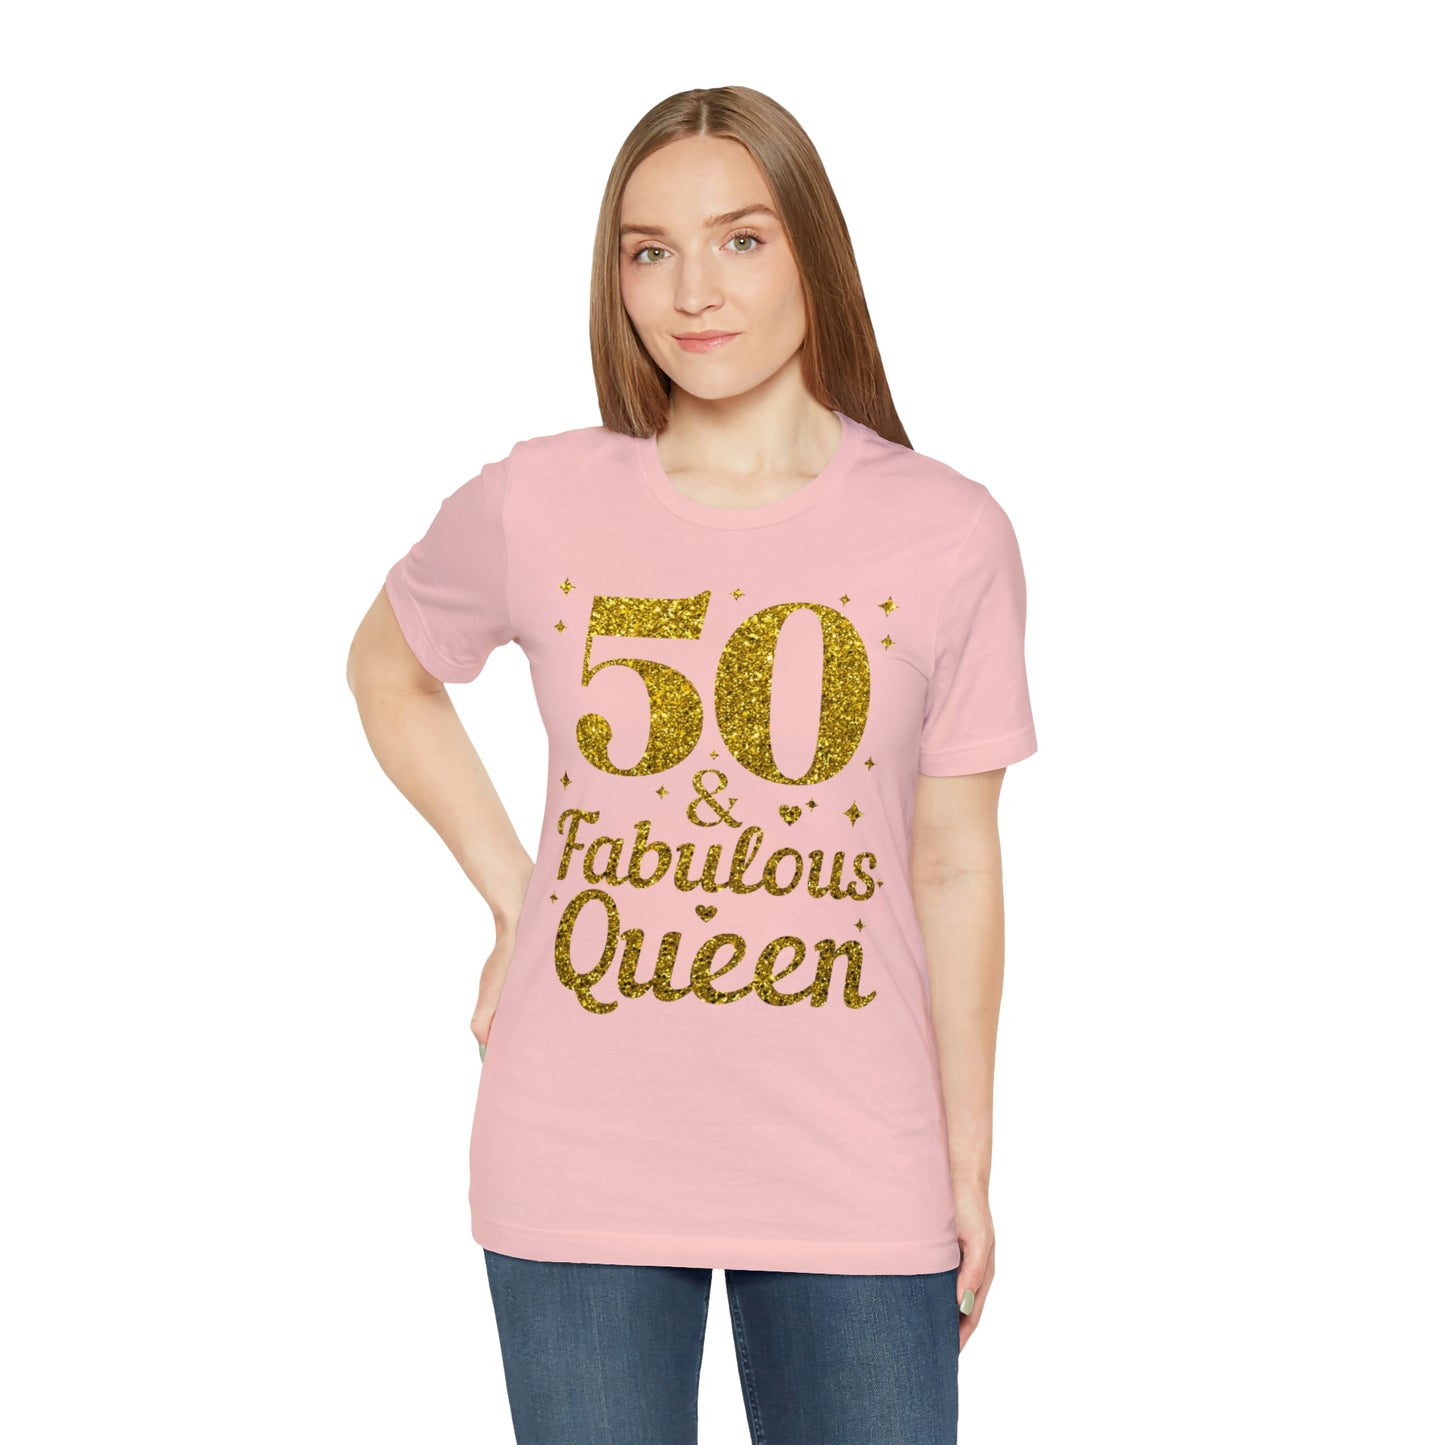 Funny 50th birthday Shirt 50 and Fabulous Queen shirt